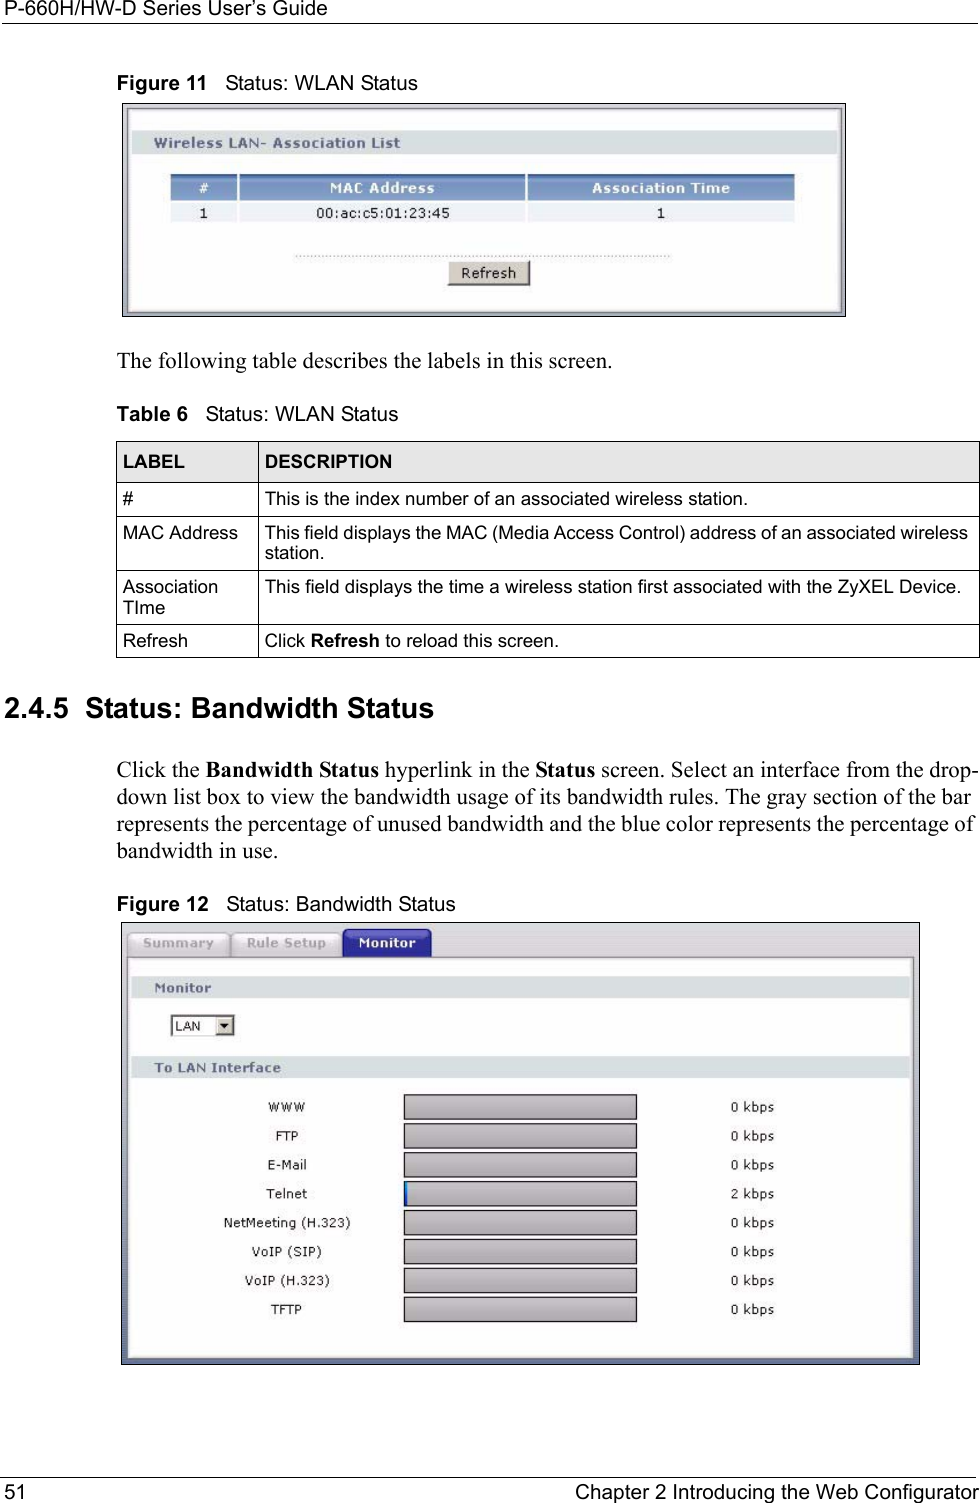 P-660H/HW-D Series User’s Guide51 Chapter 2 Introducing the Web ConfiguratorFigure 11   Status: WLAN StatusThe following table describes the labels in this screen.2.4.5  Status: Bandwidth StatusClick the Bandwidth Status hyperlink in the Status screen. Select an interface from the drop-down list box to view the bandwidth usage of its bandwidth rules. The gray section of the bar represents the percentage of unused bandwidth and the blue color represents the percentage of bandwidth in use.Figure 12   Status: Bandwidth StatusTable 6   Status: WLAN StatusLABEL  DESCRIPTION#  This is the index number of an associated wireless station. MAC Address This field displays the MAC (Media Access Control) address of an associated wireless station.Association TImeThis field displays the time a wireless station first associated with the ZyXEL Device.Refresh Click Refresh to reload this screen.